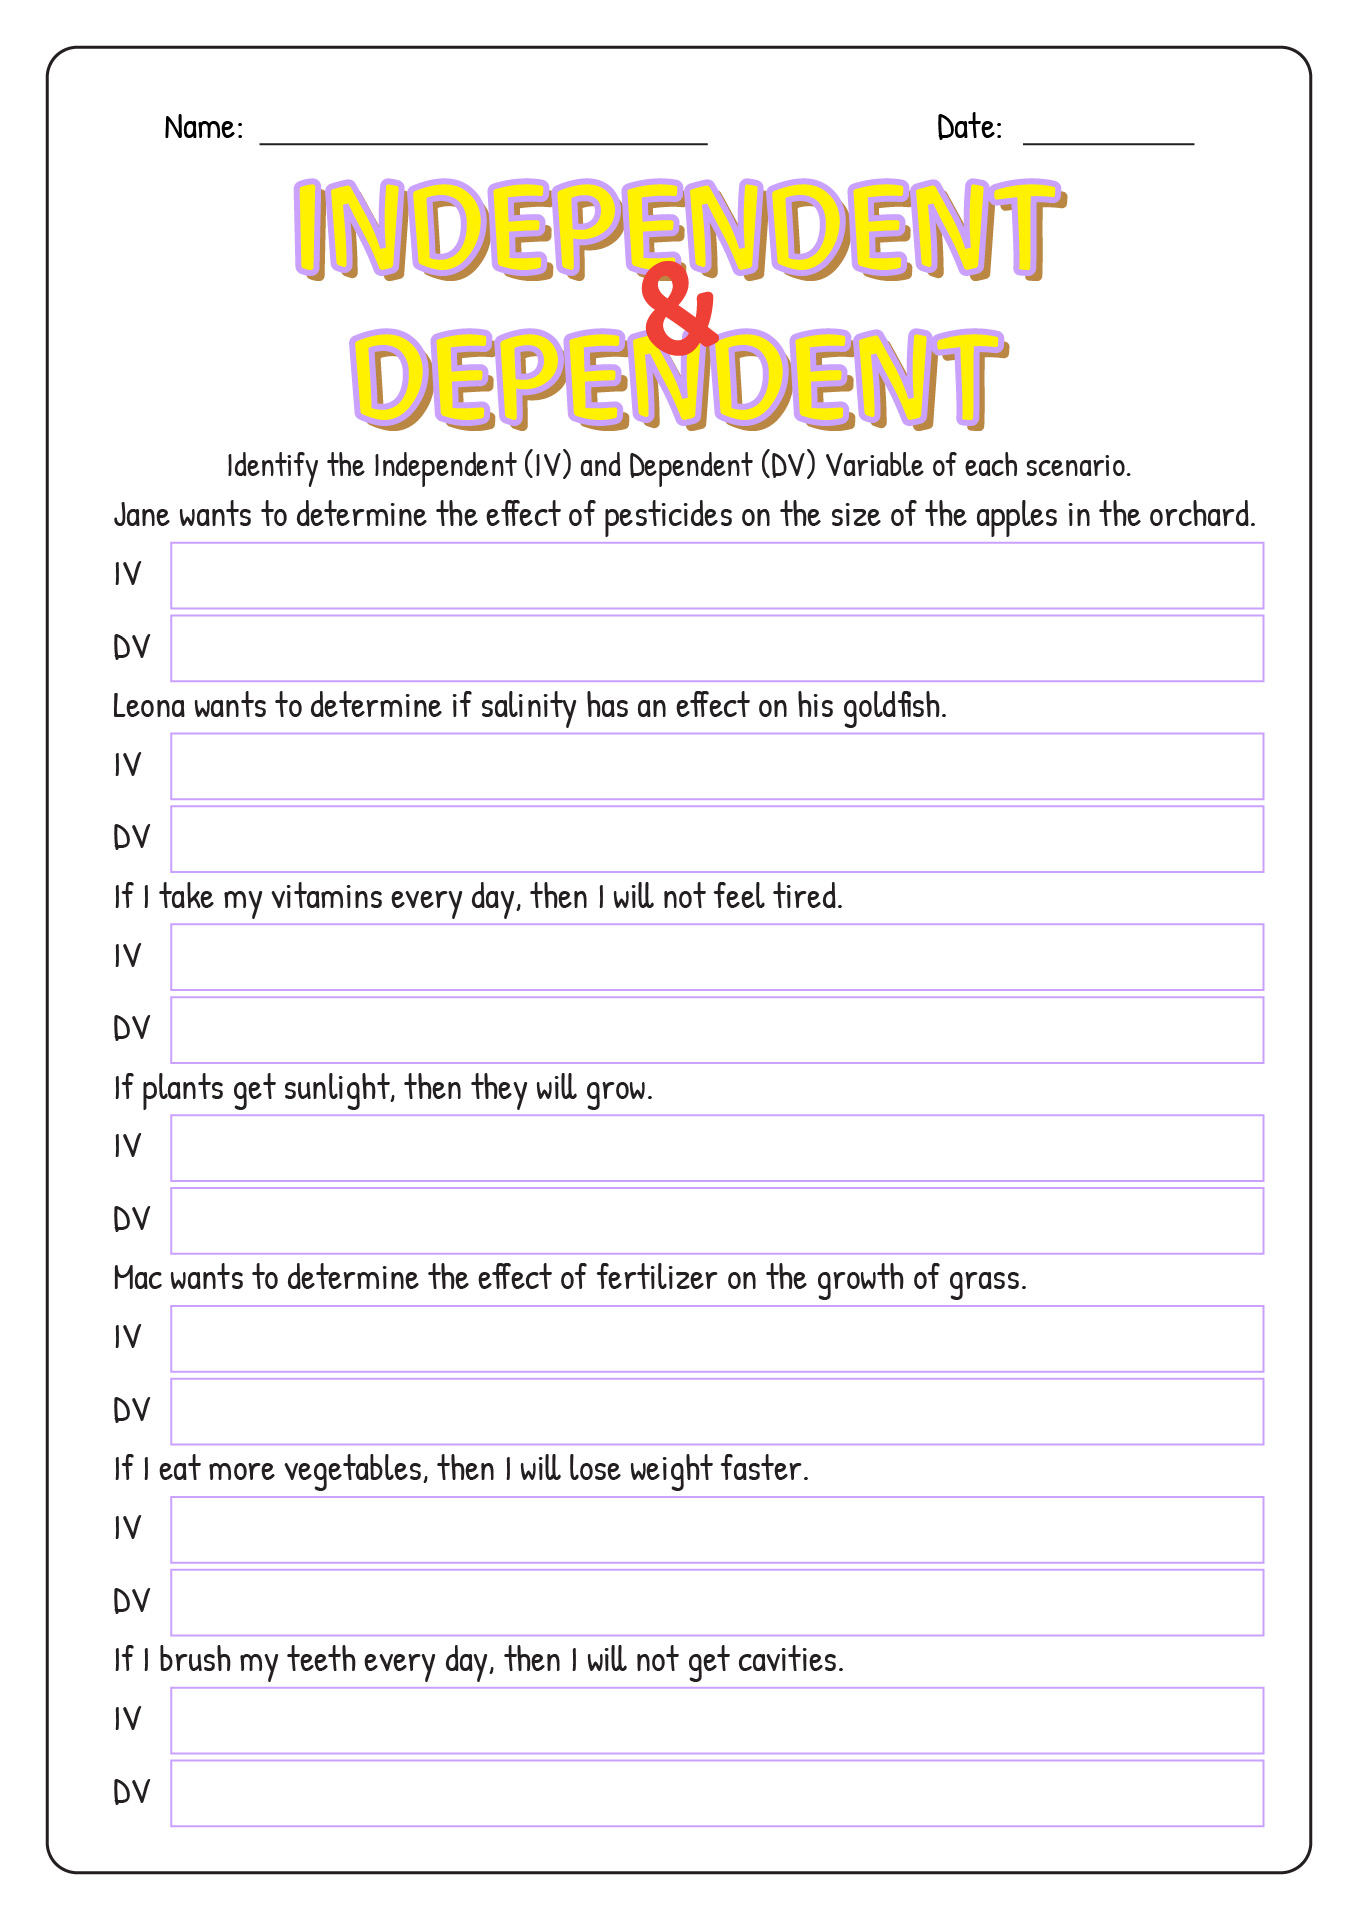 Independent and Dependent Variables Examples Worksheet